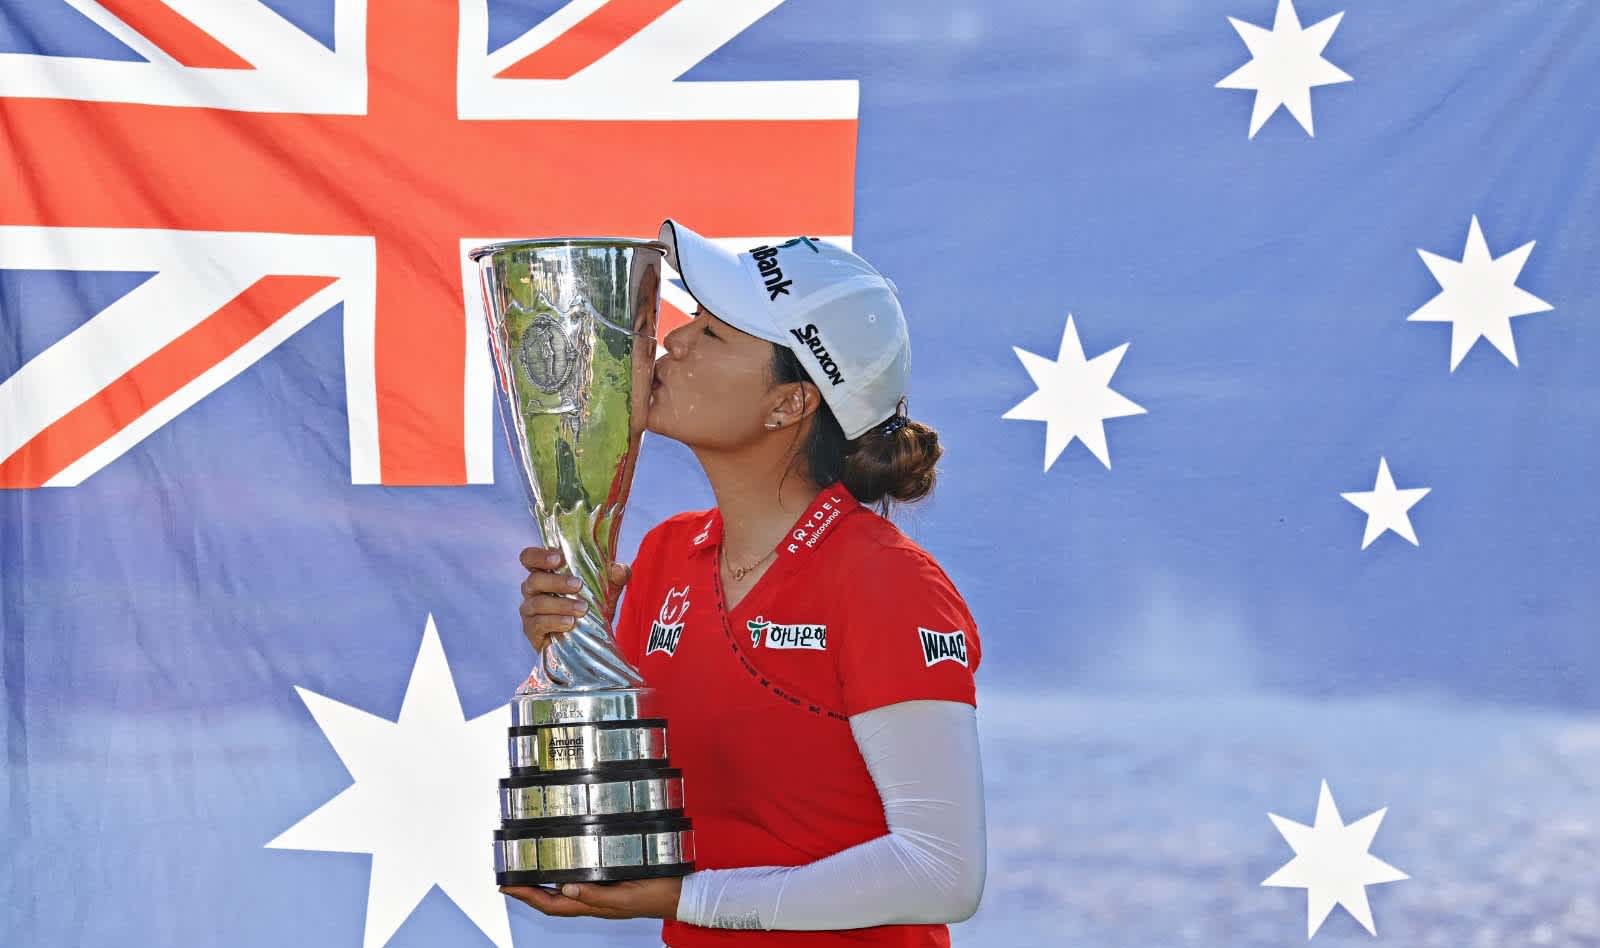 Minjee Lee kisses the Evian Championship trophy in front of the Australian flag.